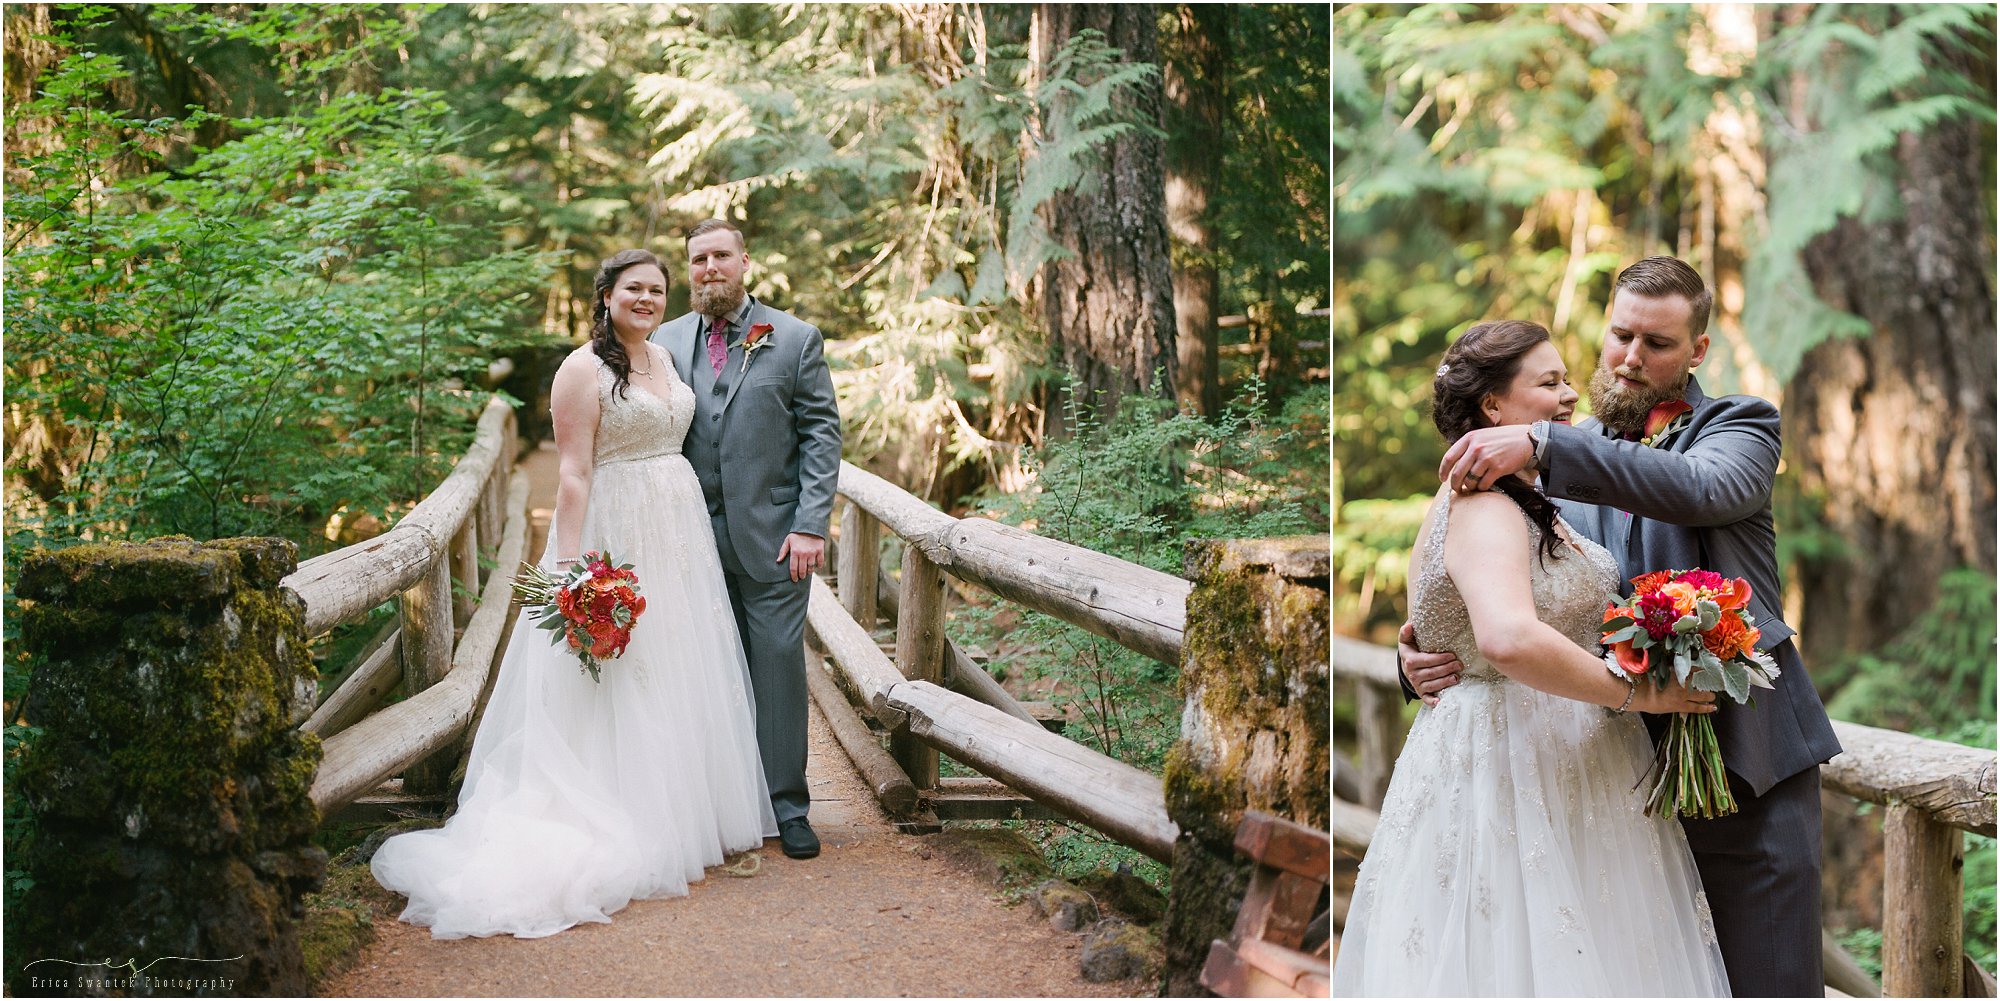 A film image and a digital image of a beautiful wedding couple at their intimate Oregon waterfall wedding. | Erica Swantek Photography